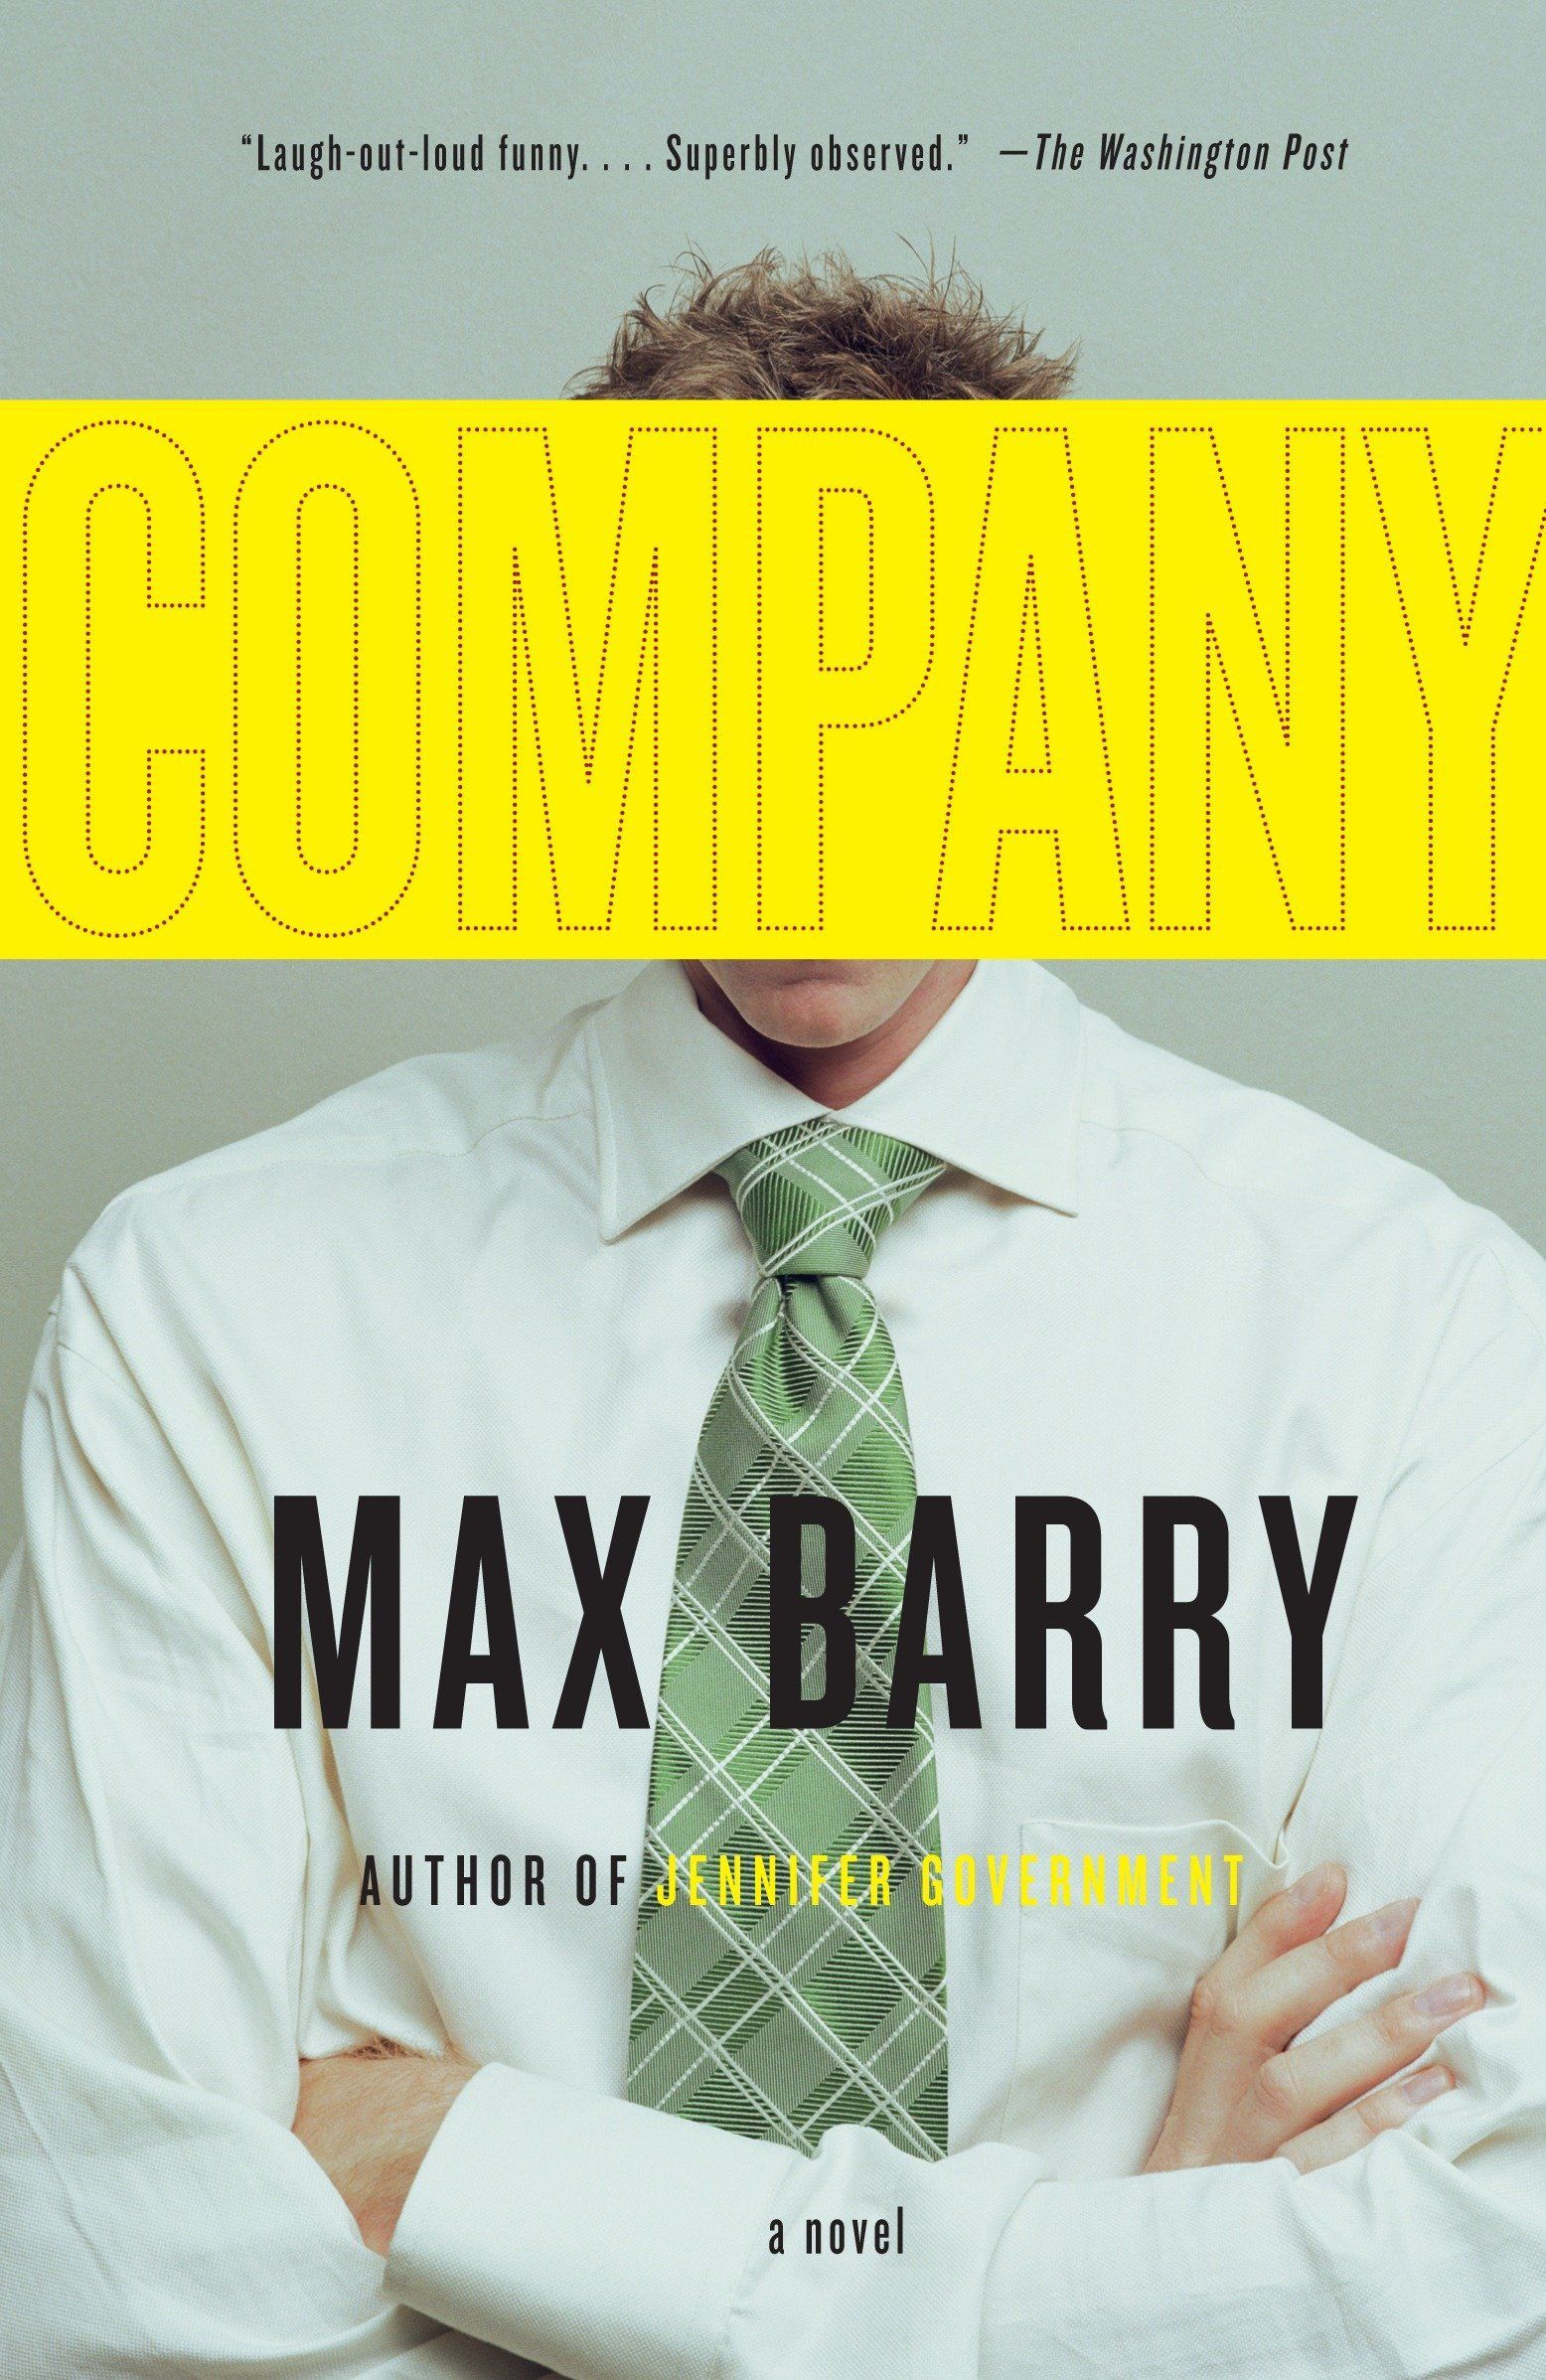 Company by Max Barry Book Cover